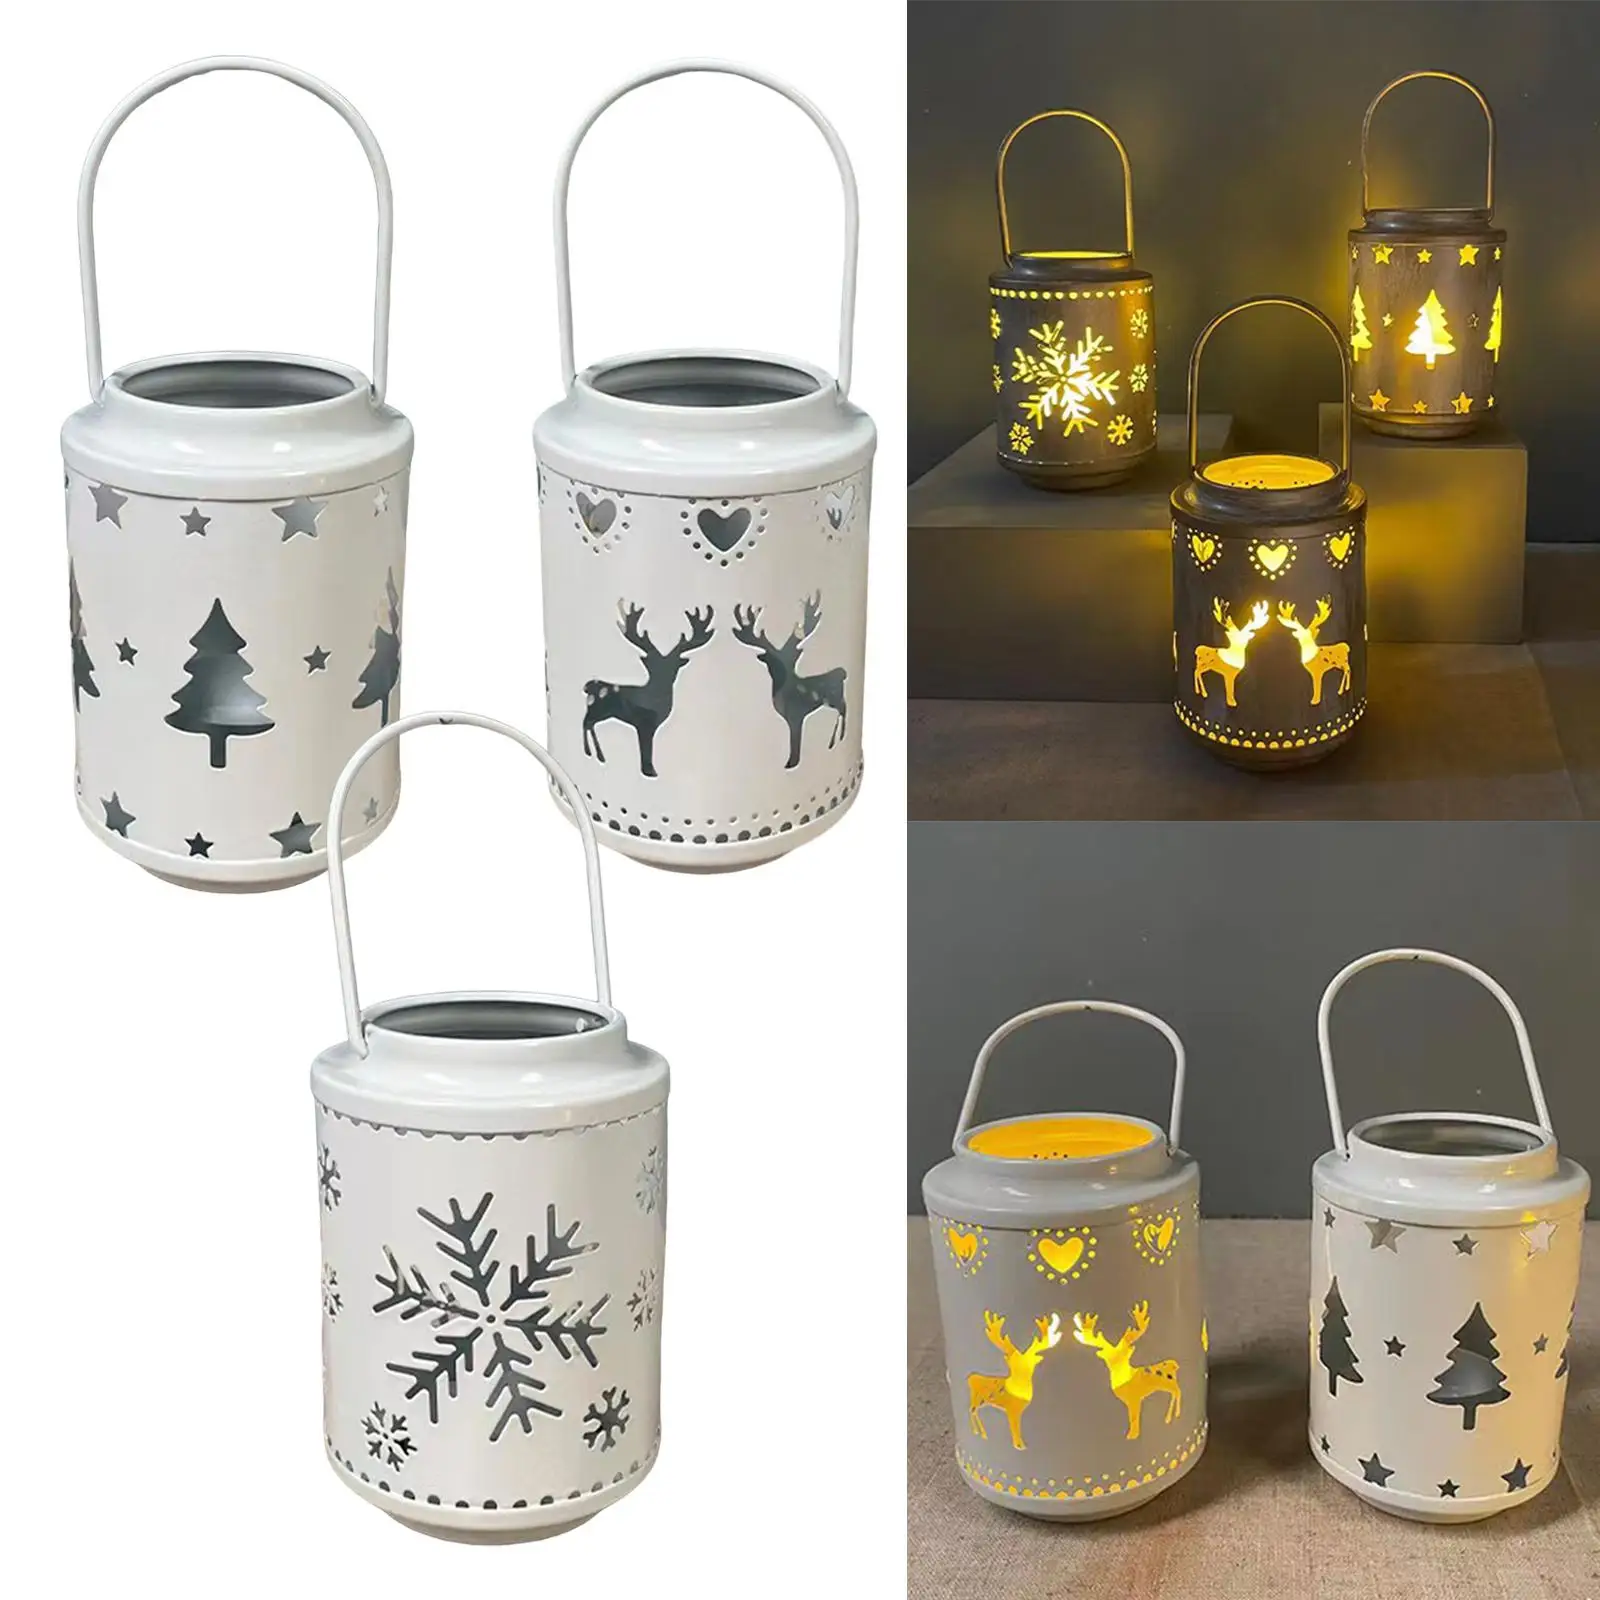 Candle Lantern Home Decor Vintage Candle Holders for Centerpiece Wedding